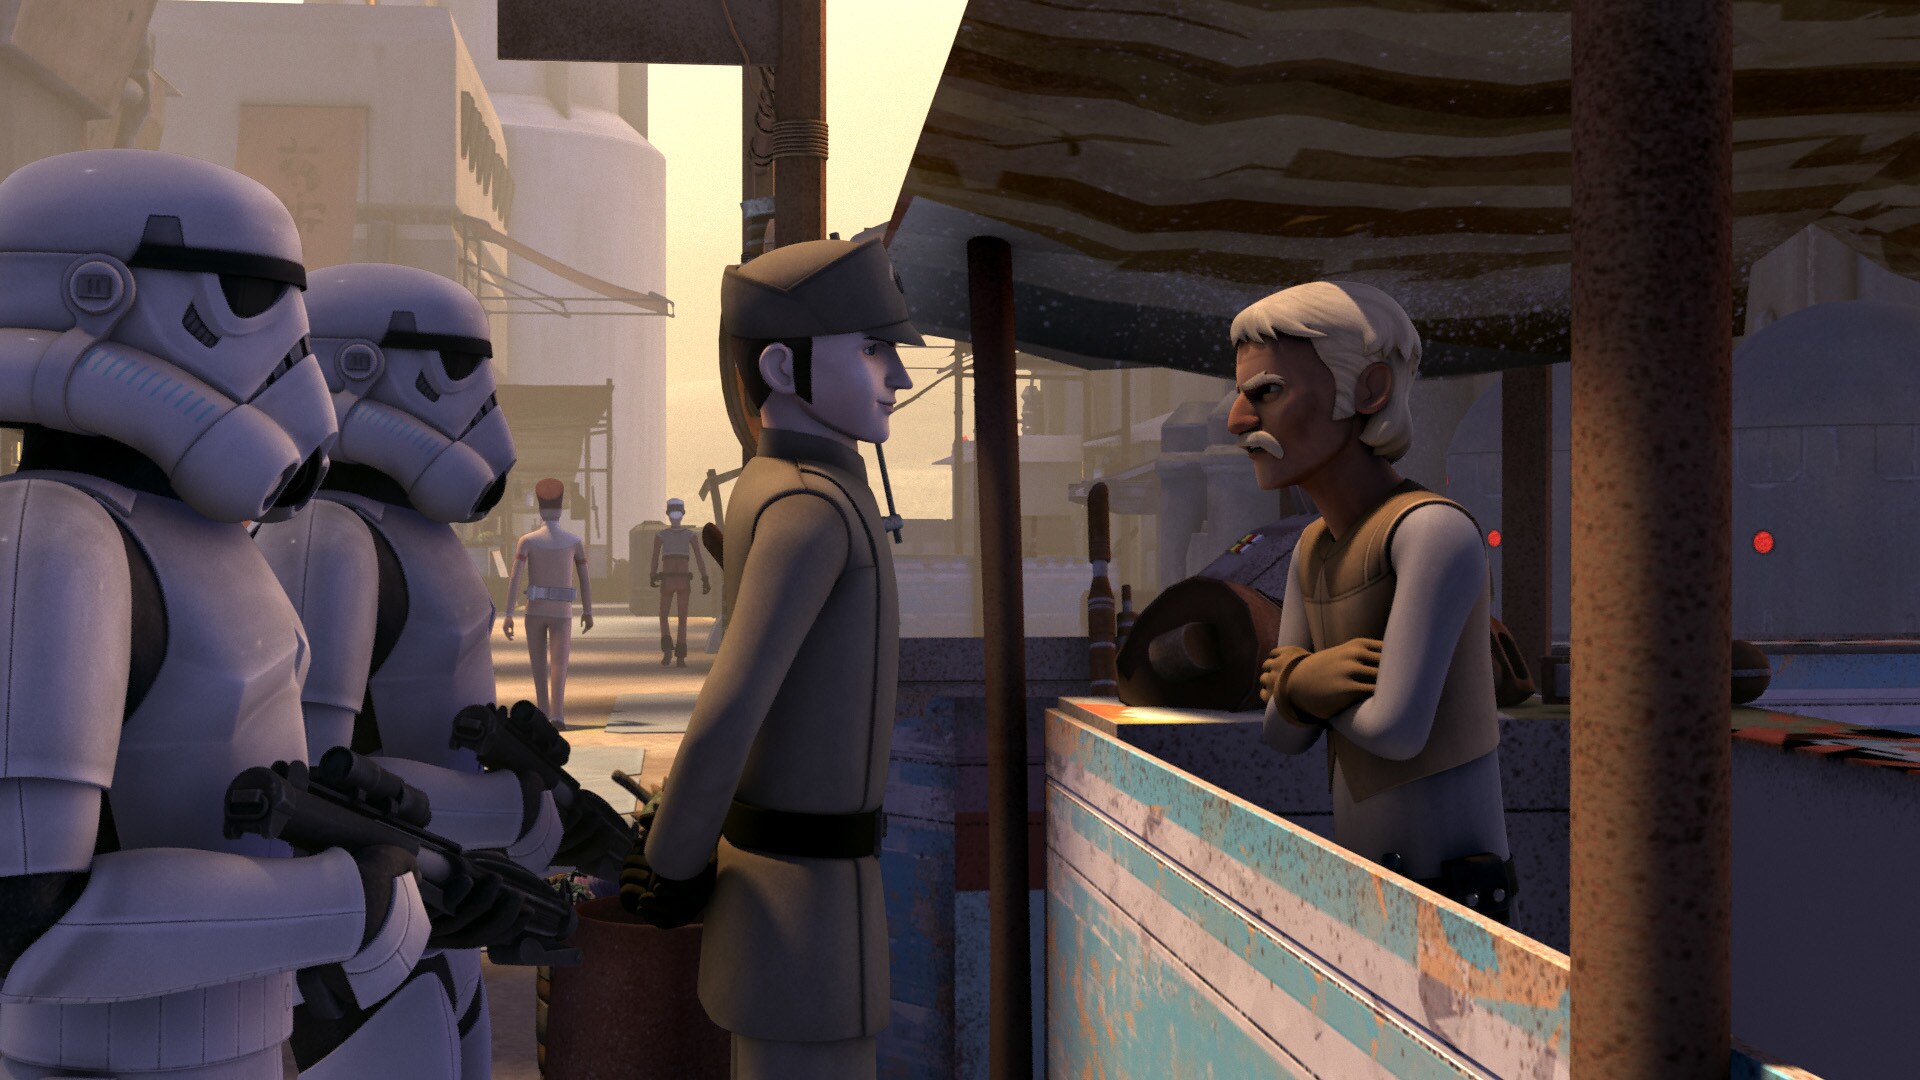 Ezra says his goodbyes, but notices Supply Master Lyste and a stormtrooper escort nearby. He watc...